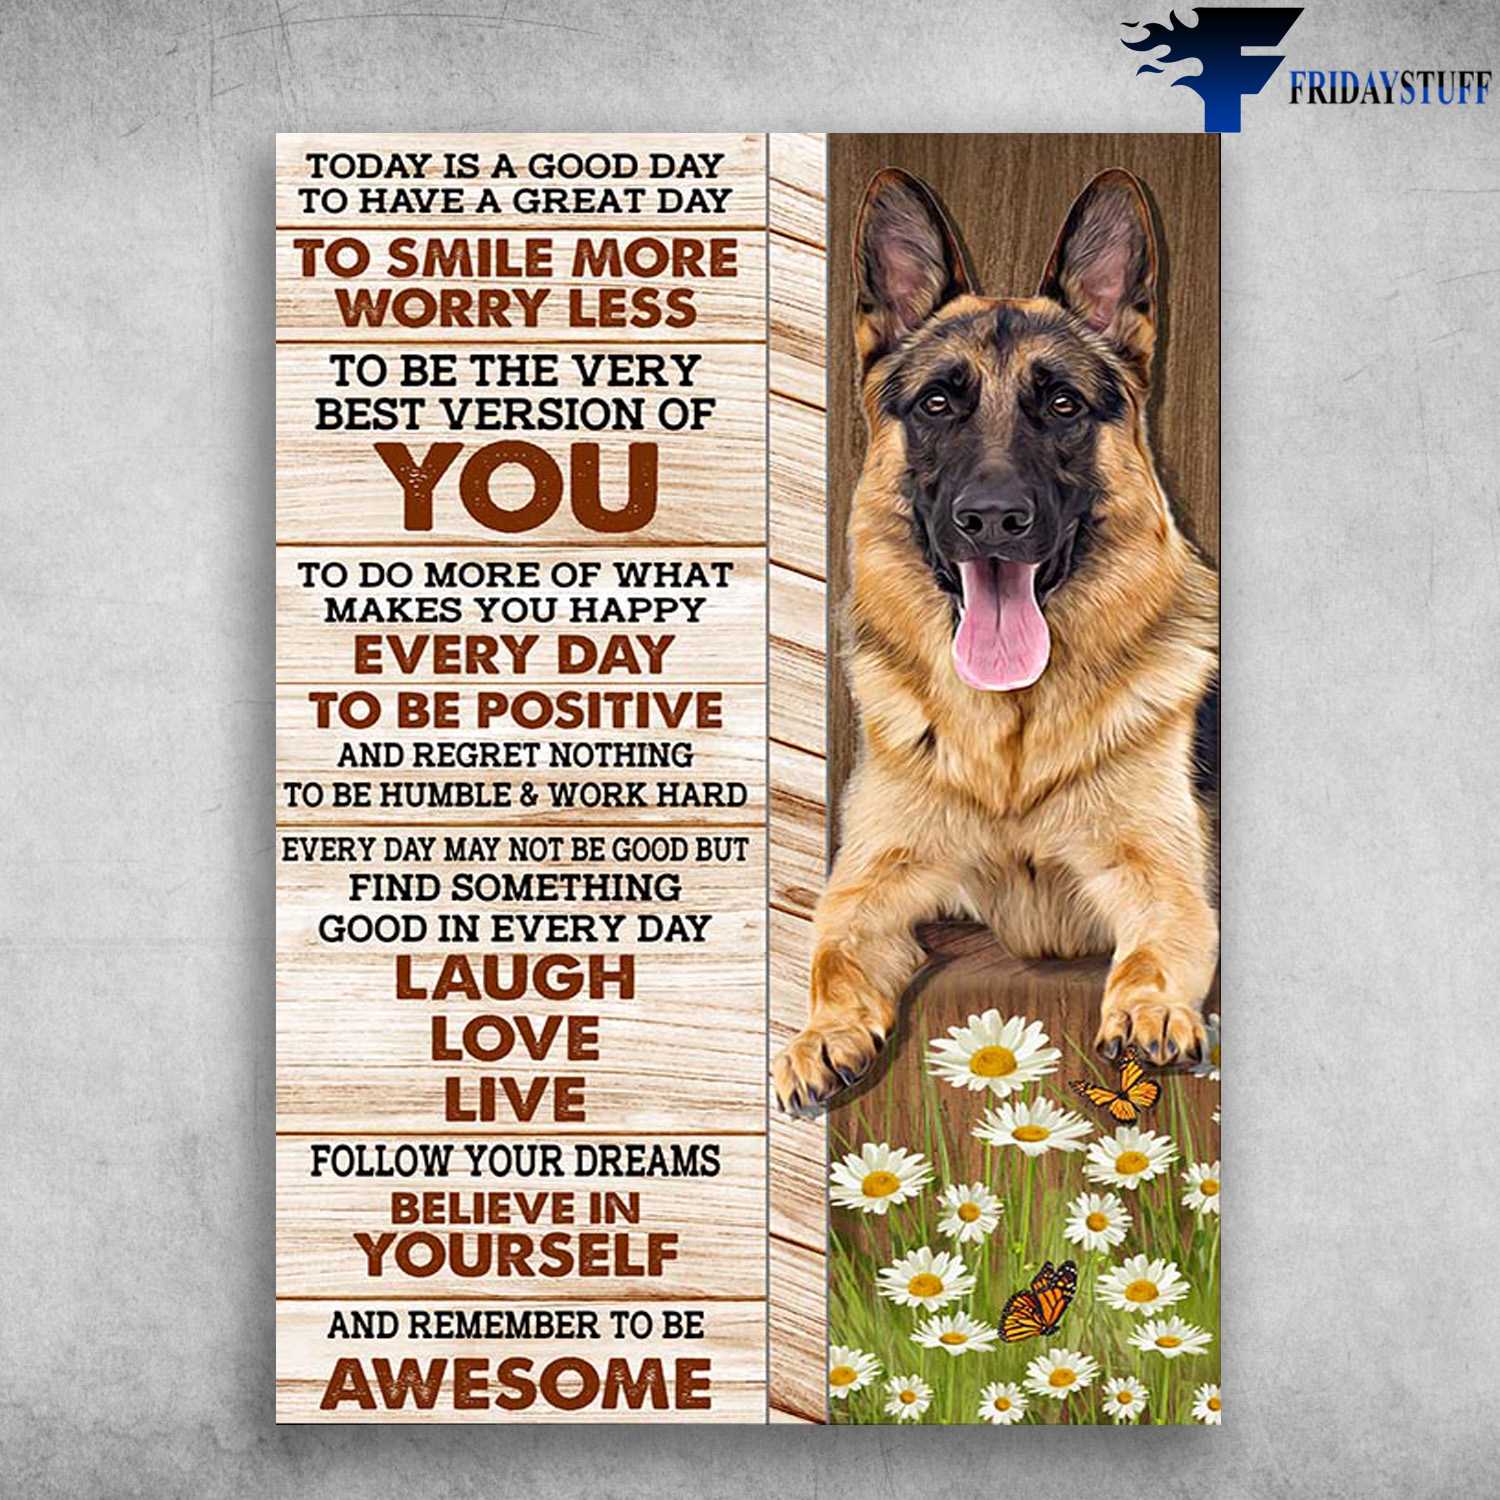 German Shepherd Dog - Today I A Good Day, To Have A Great Day, To Smile Less, To Be The Very Best Version Of You, To Do More Of What, Makes You Happy, Every Day To Be Postive